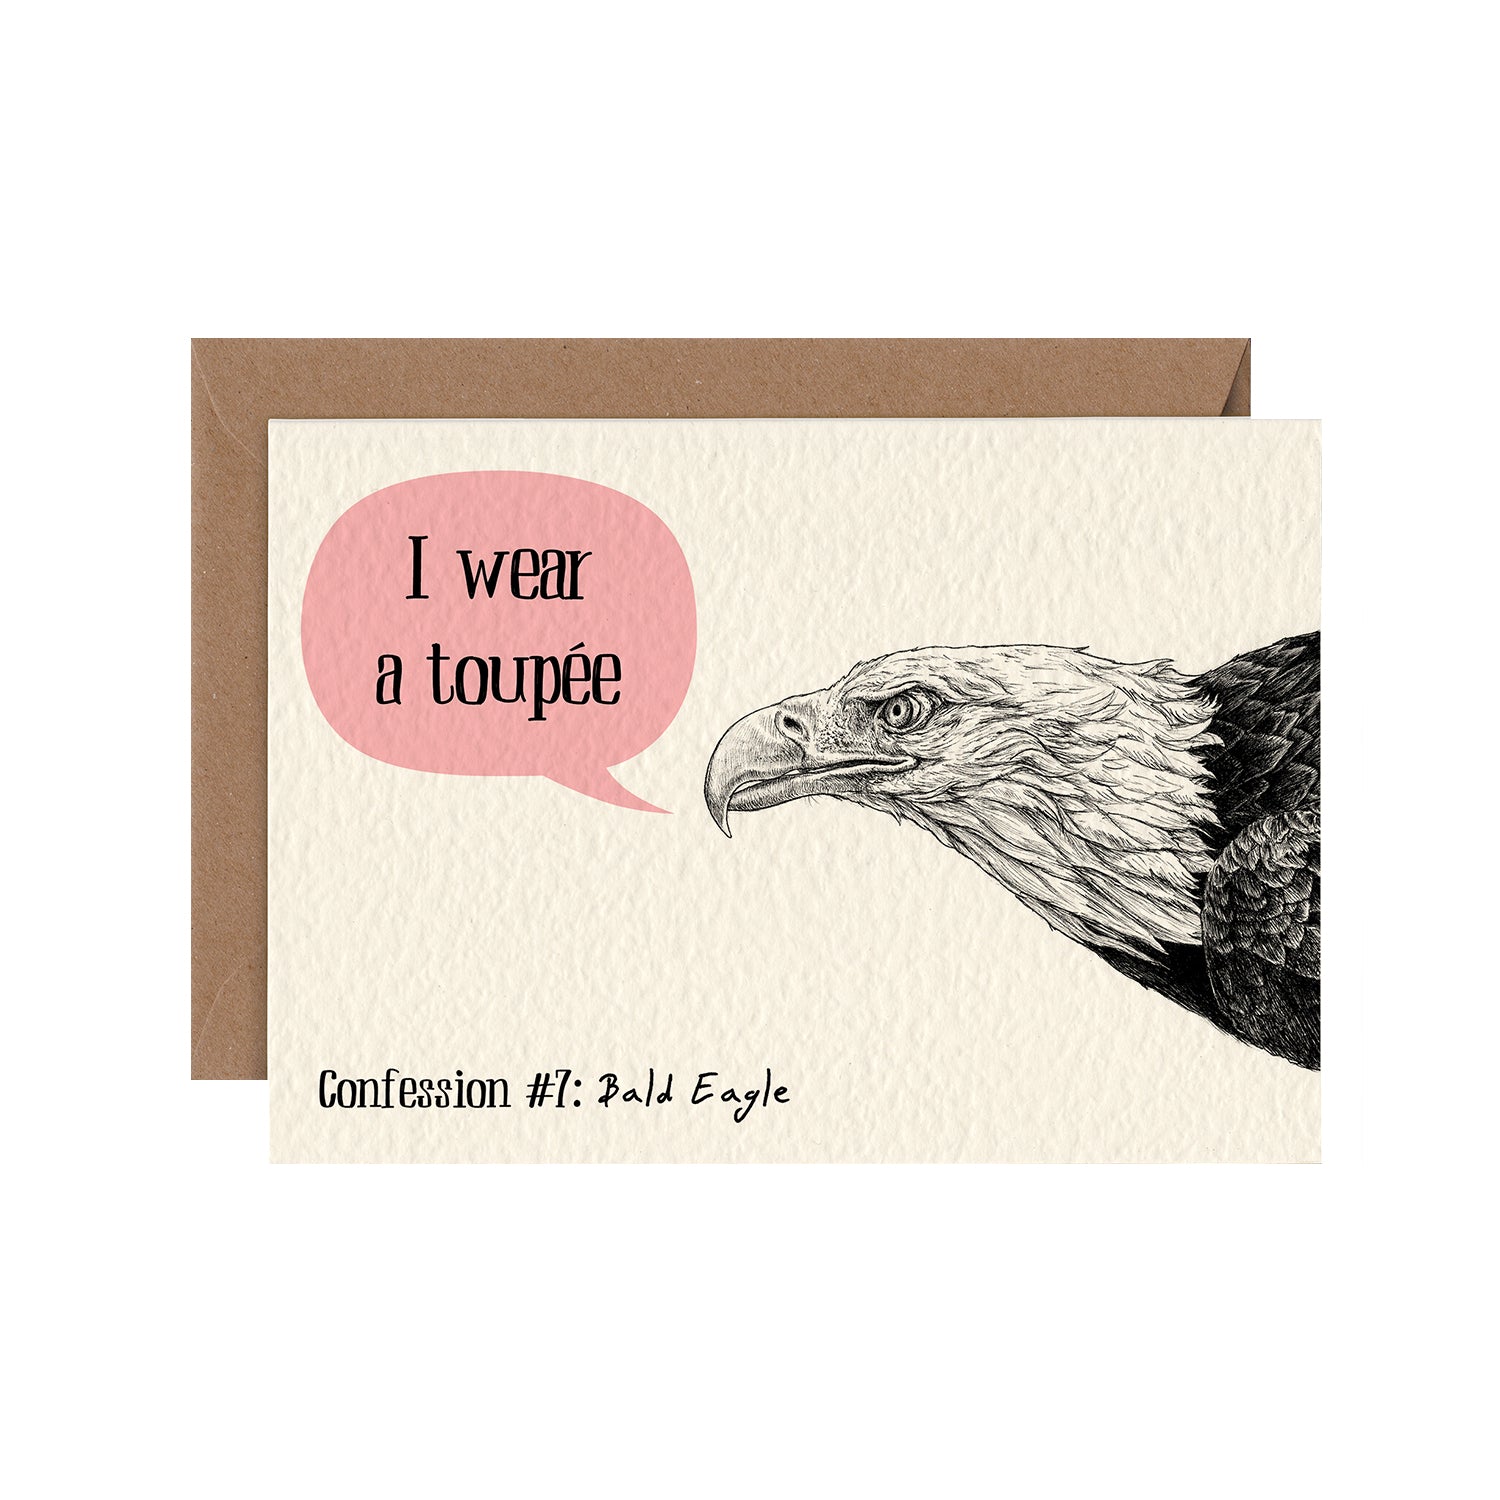 A bald eagle with a speech bubble saying &quot;Hester &amp; Cook&